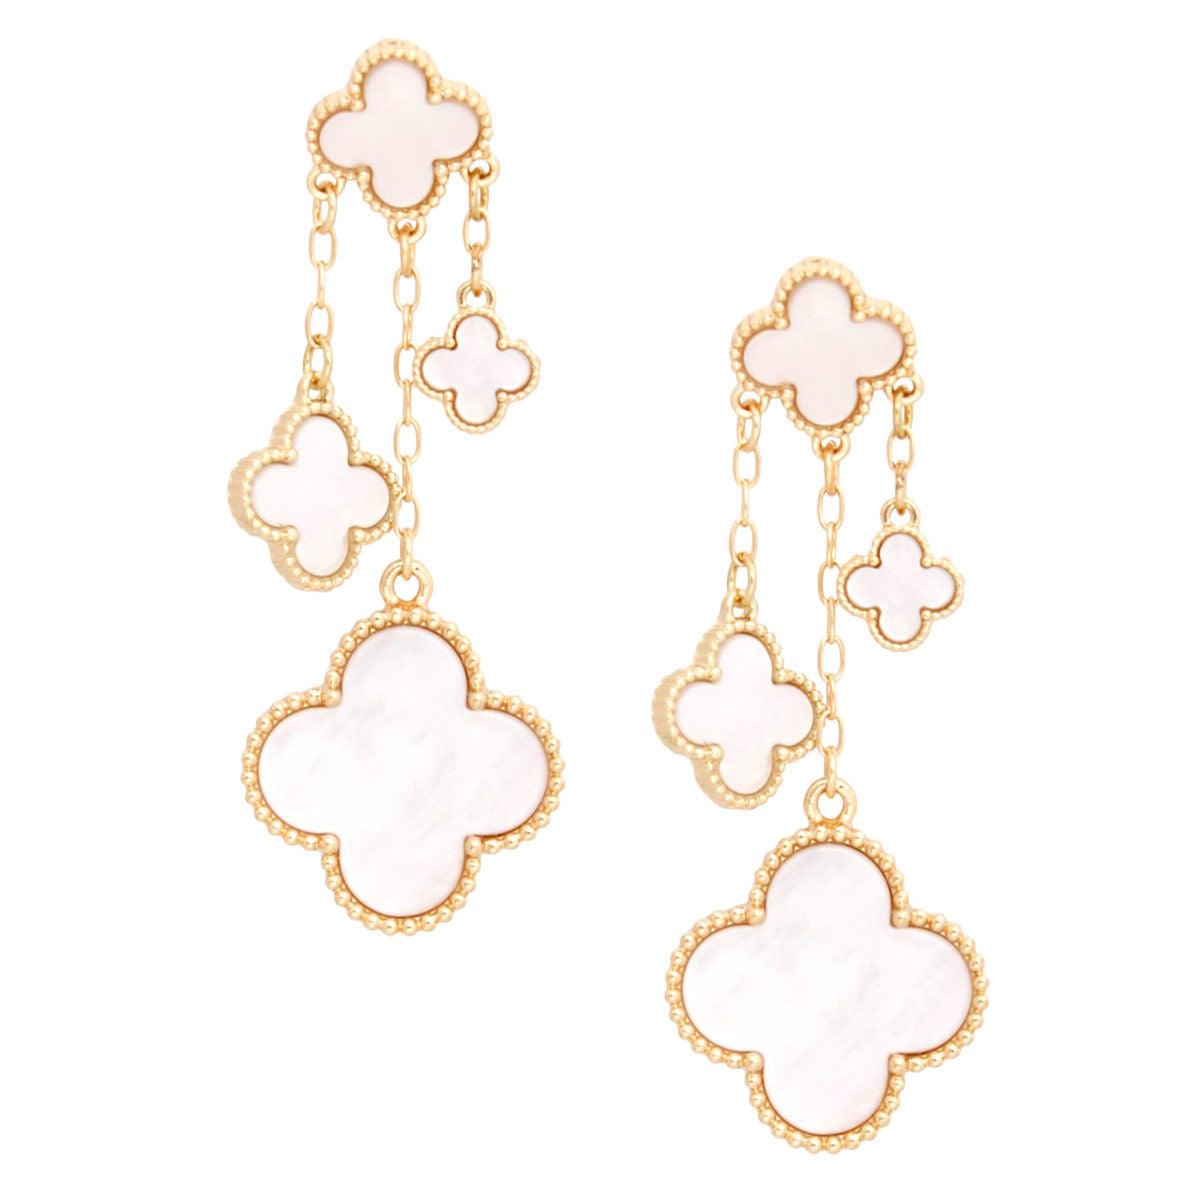 Exquisite White Clover Drop Dangle Earrings Gold Must-Have